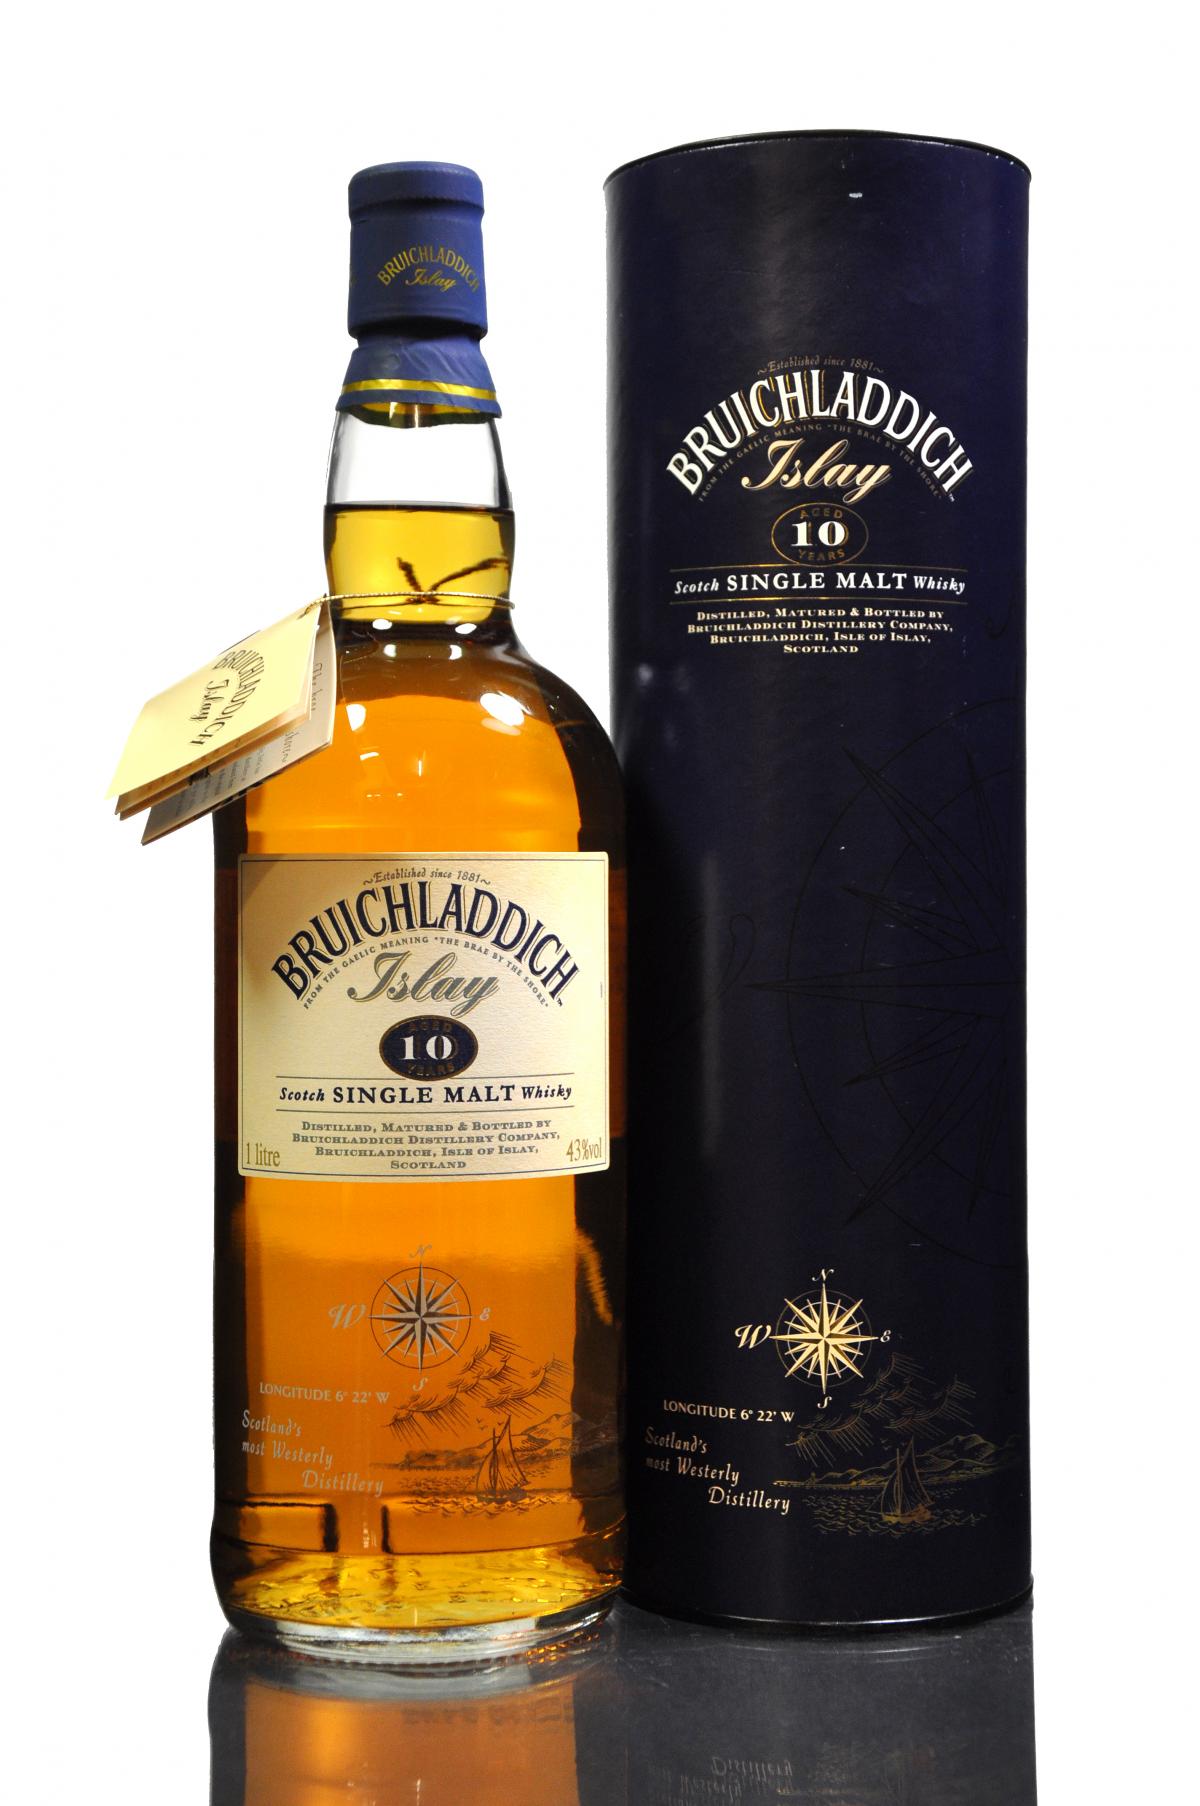 Bruichladdich 10 Year Old - 1990s - 1 Litre